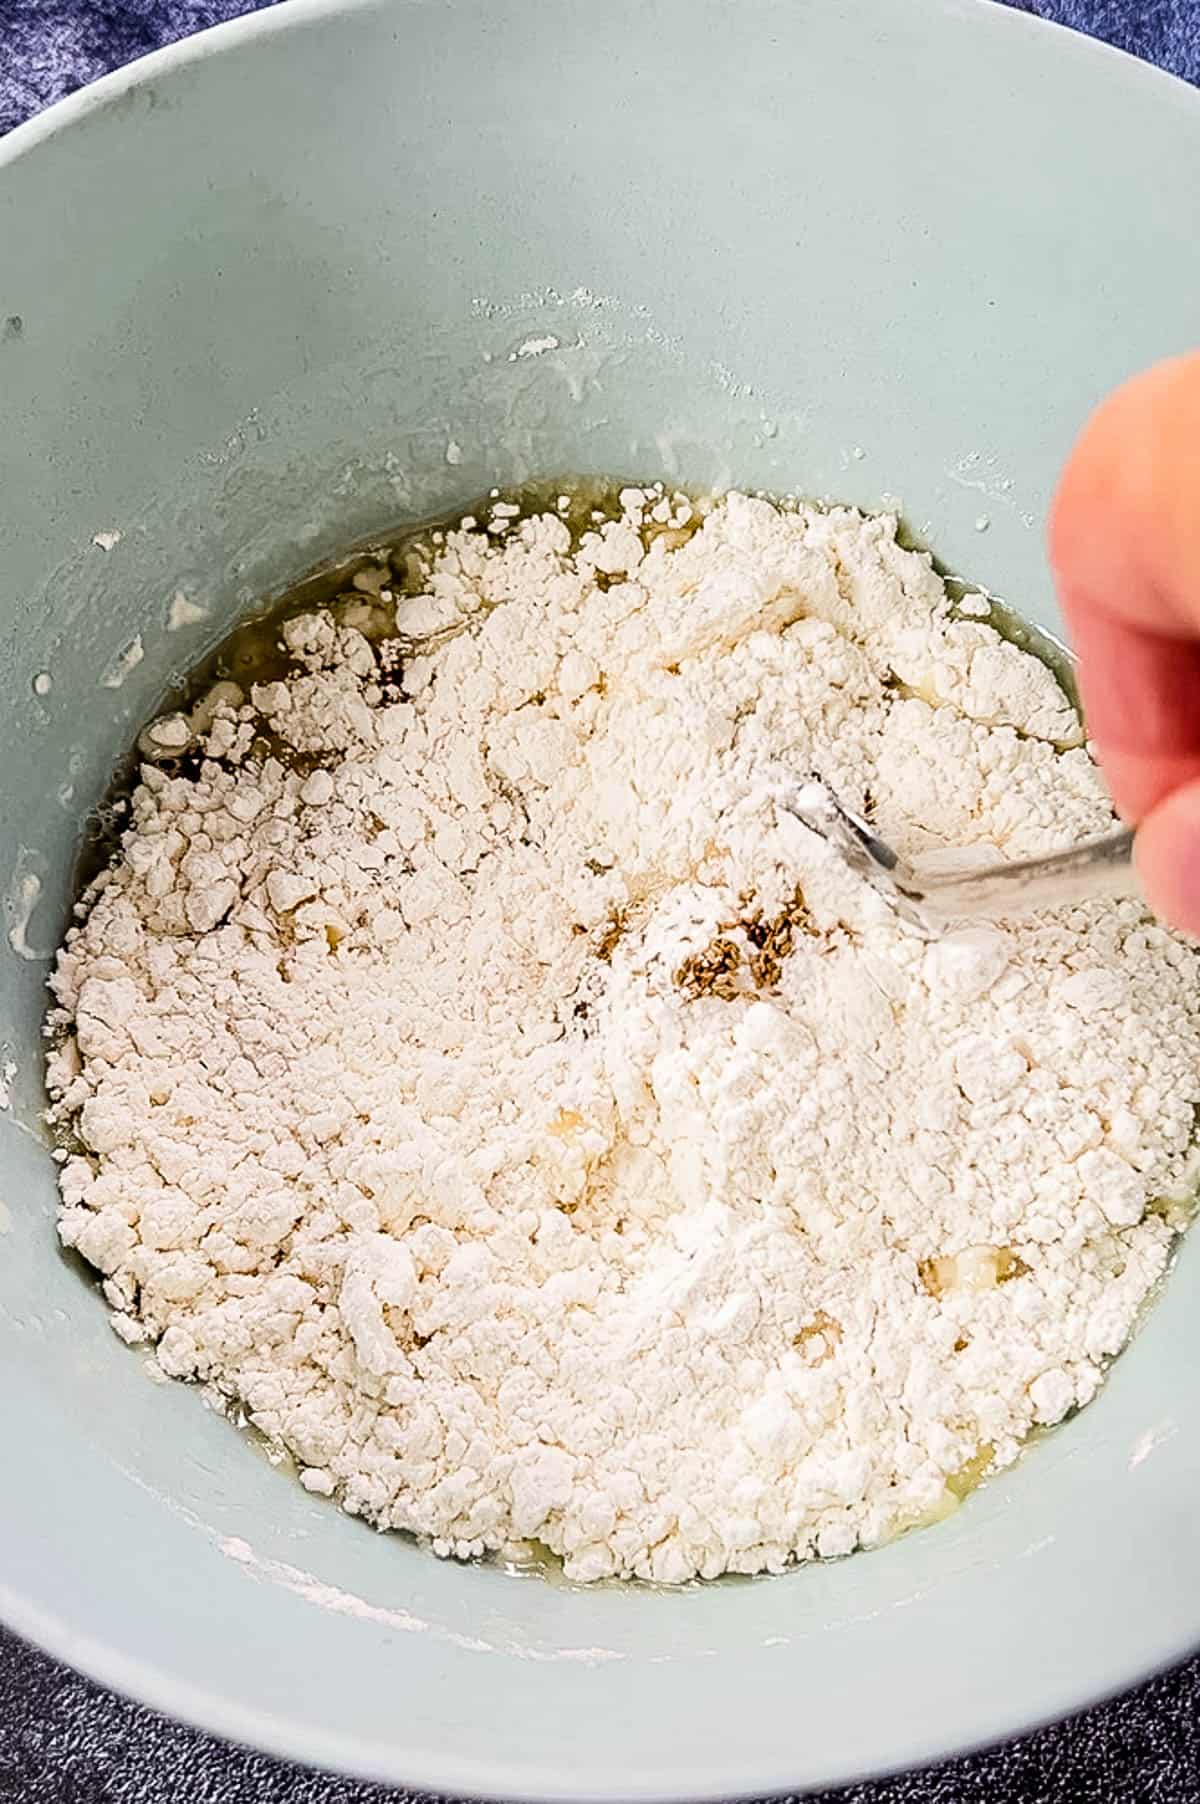 A person mixing flour in a bowl with a spoon while preparing air fryer samosas.